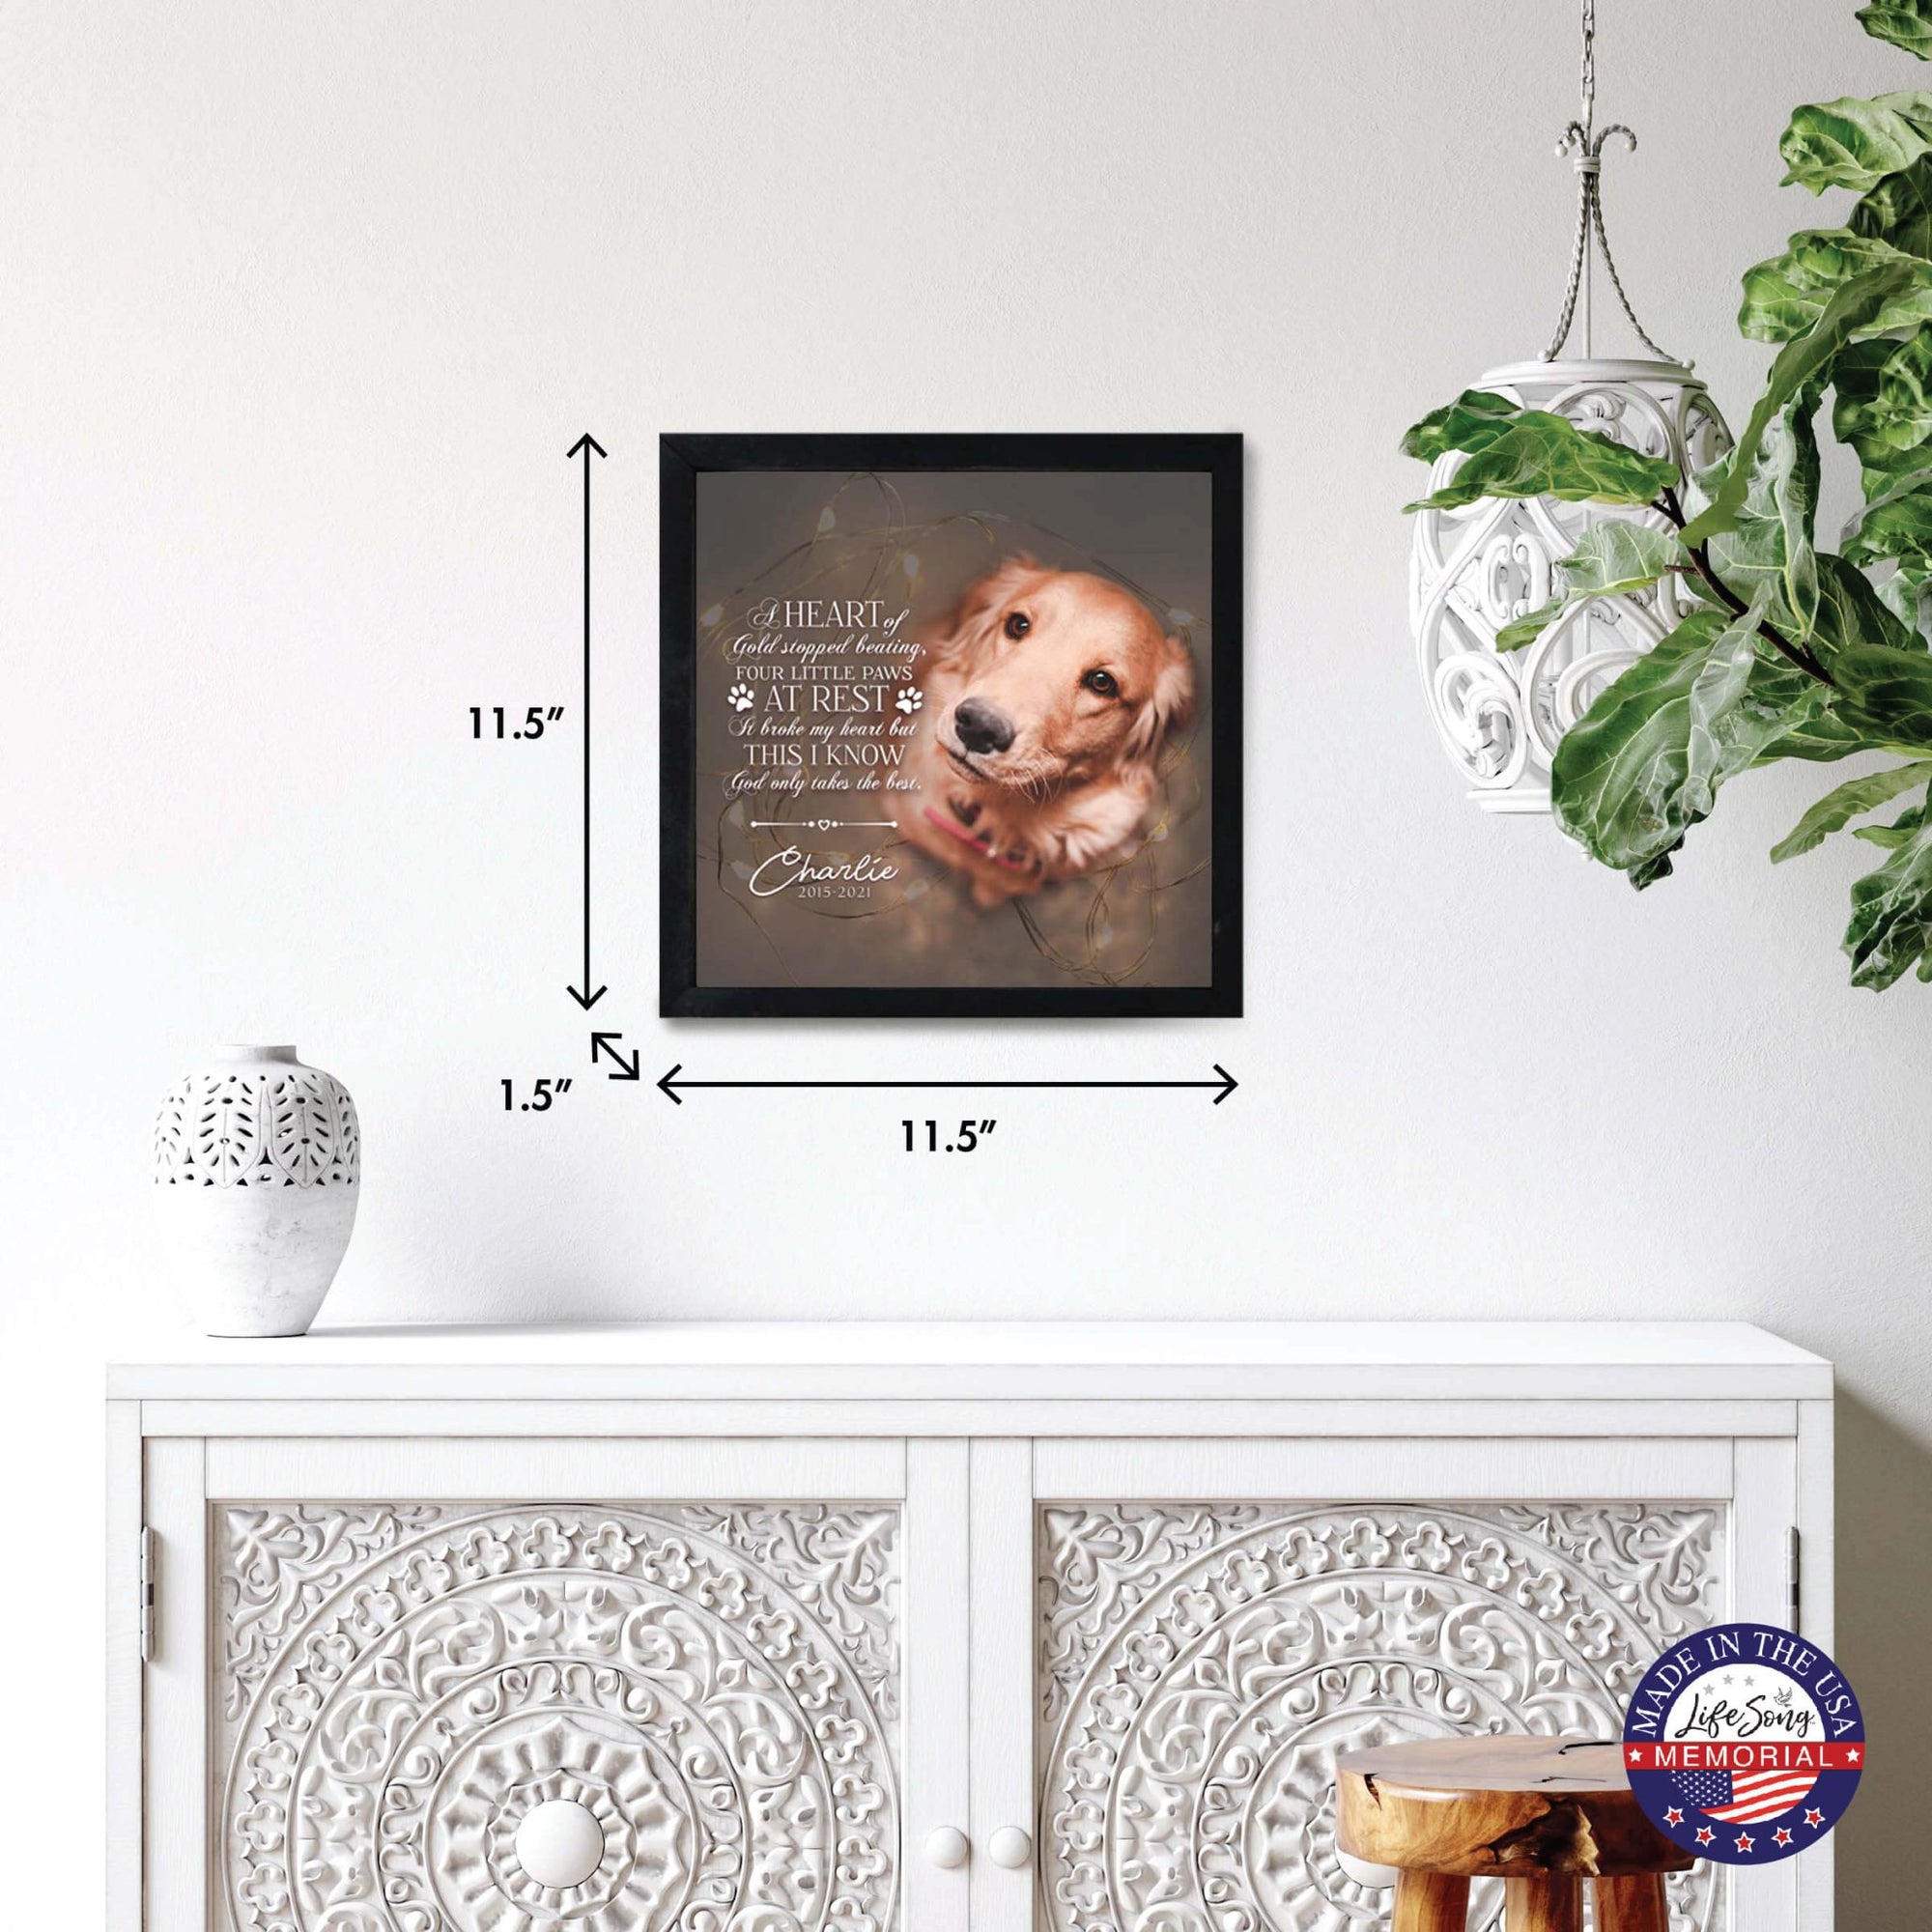 Custom Pet Memorial Framed Shadow Box Wall Décor for the Loss of Beloved Pet - A Heart Of Gold - LifeSong Milestones